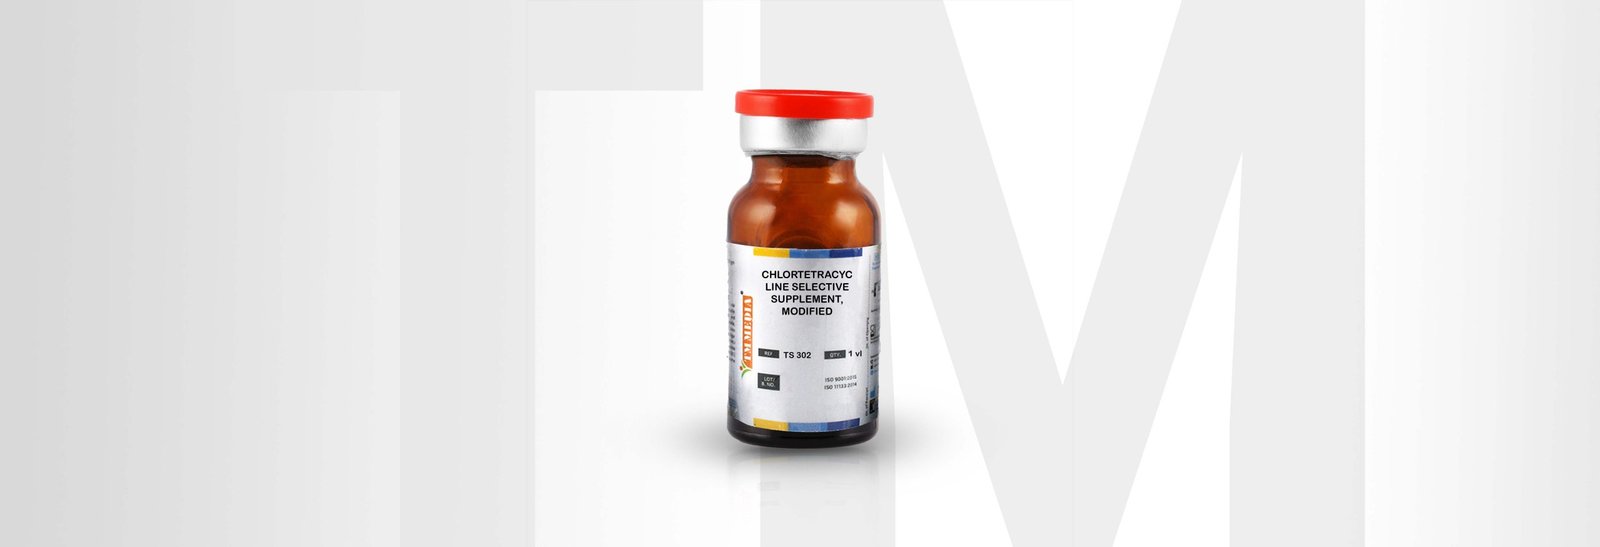 CHLORTETRACYCLINE SELECTIVE SUPPLEMENT, MODIFIED THE NAME OF TRUST AND MILLIONS USERS